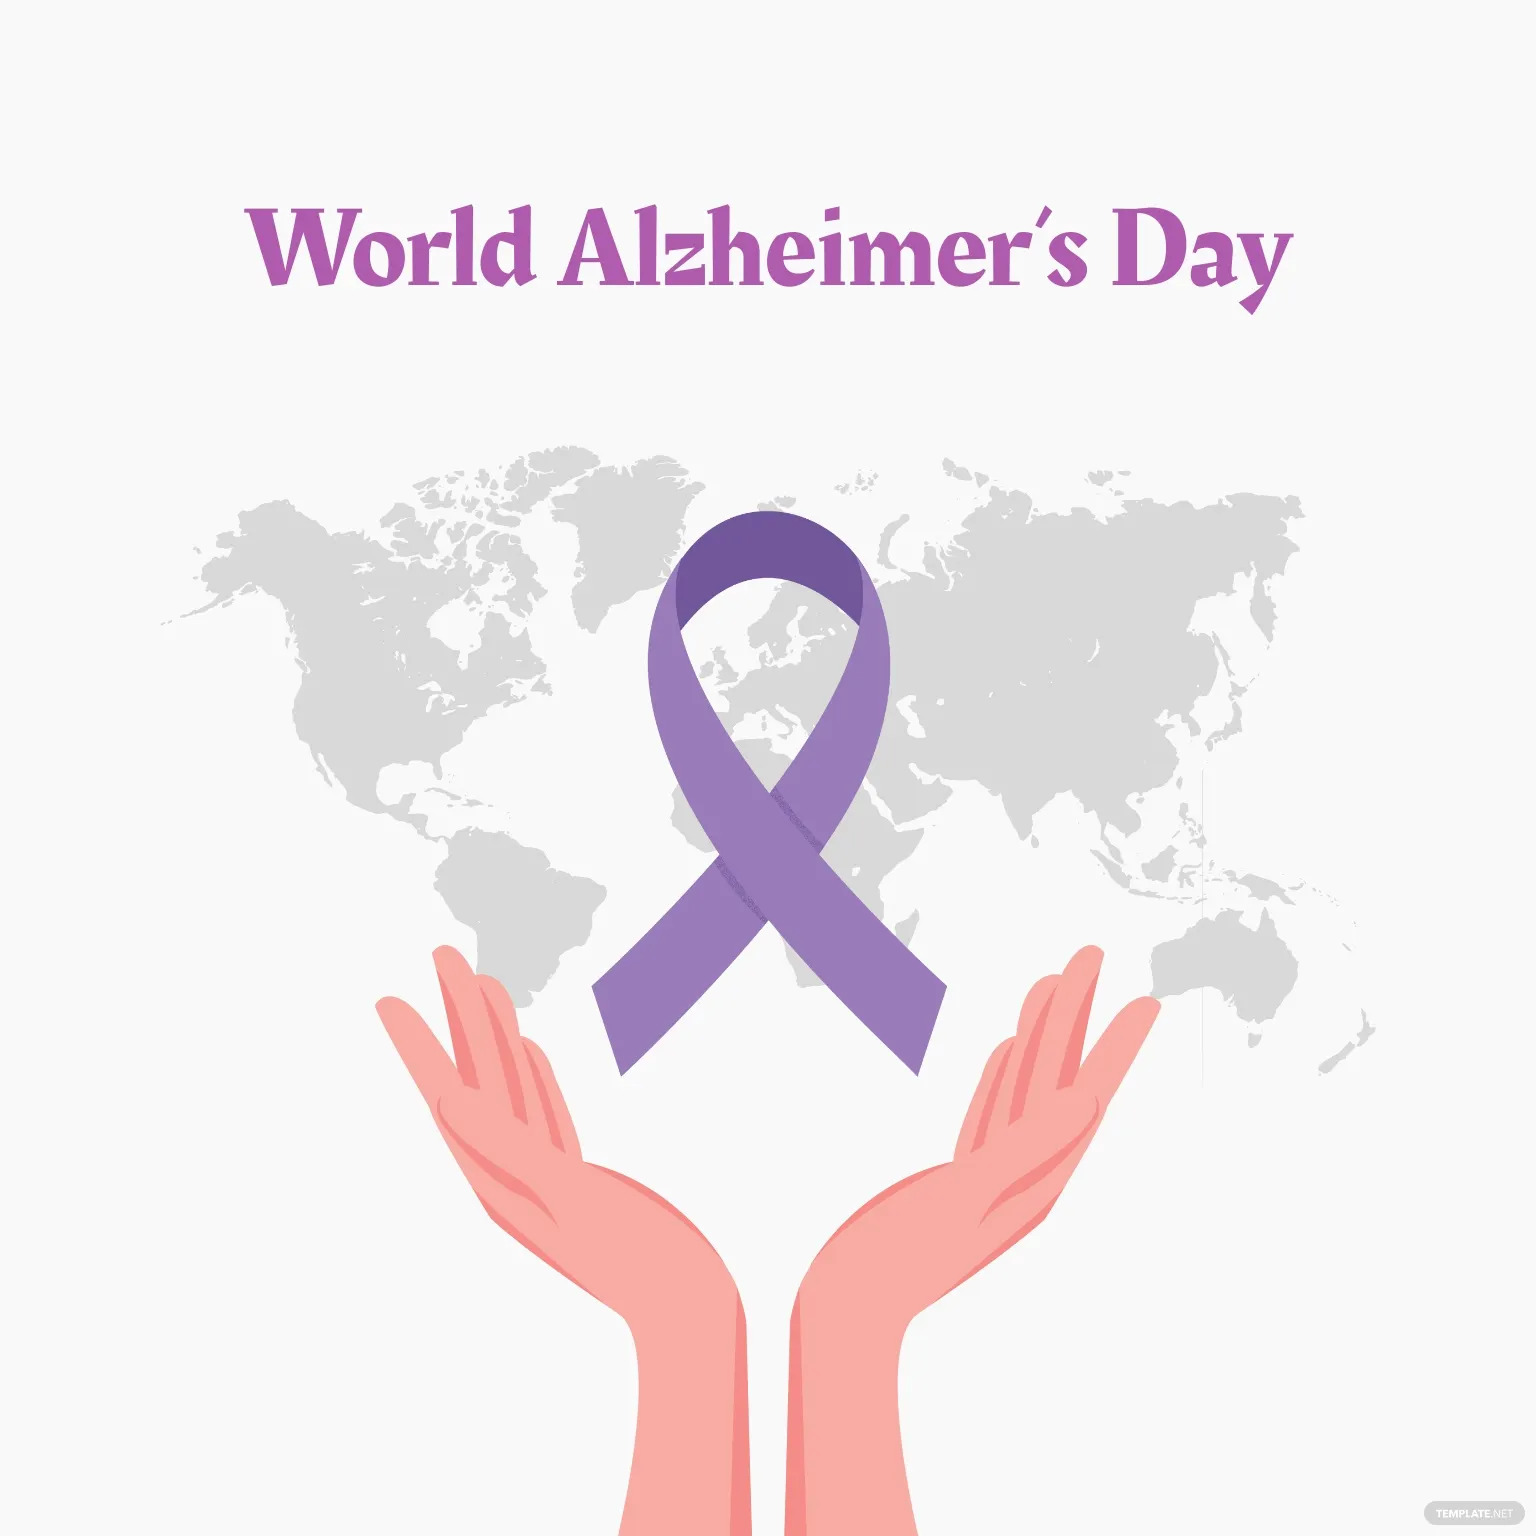 world alzheimer’s day illustration ideas and examples